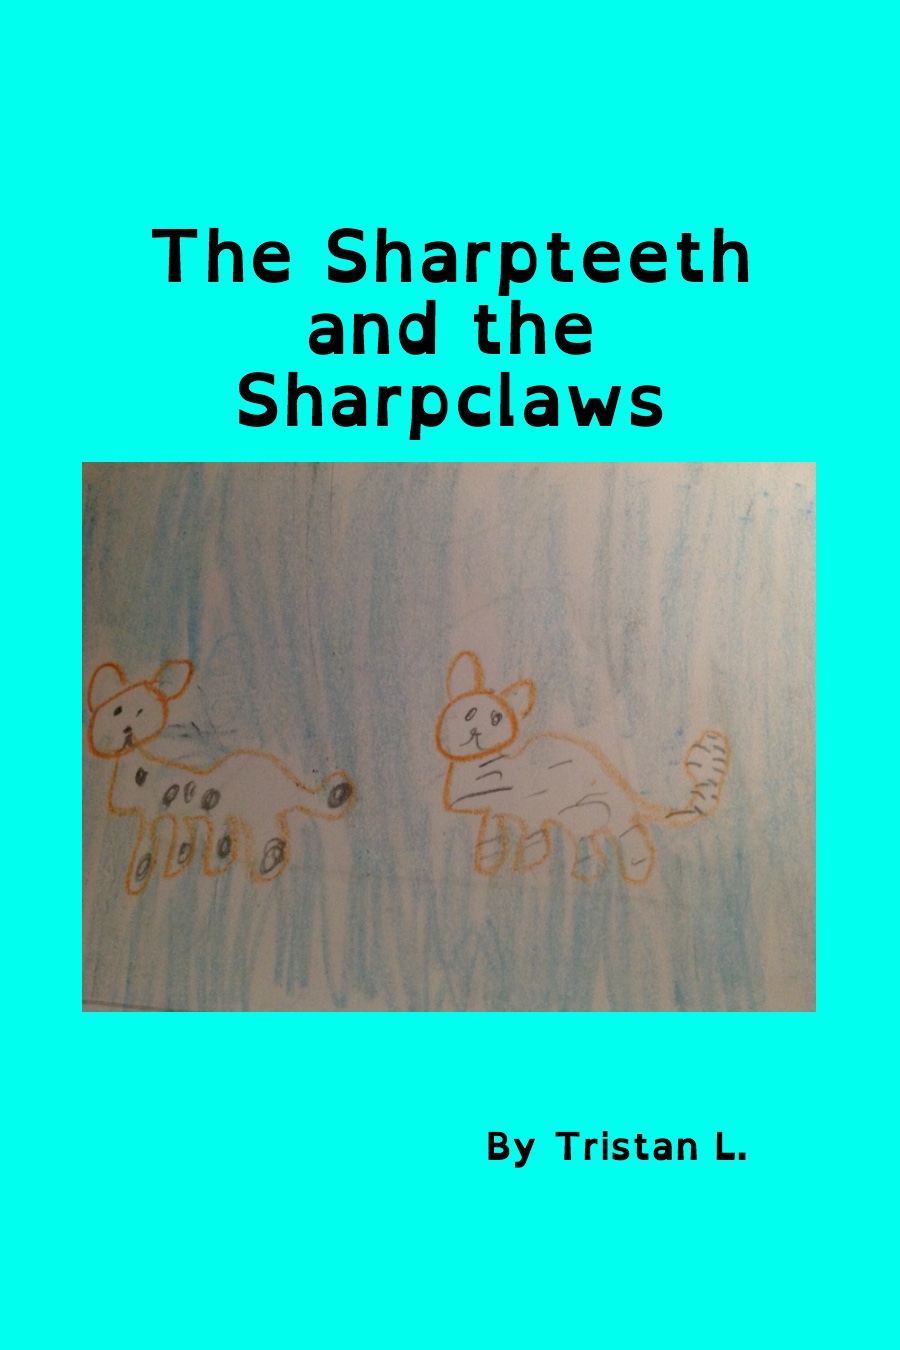 The Sharpteeth and Sharpclaws by Tristan L (1)